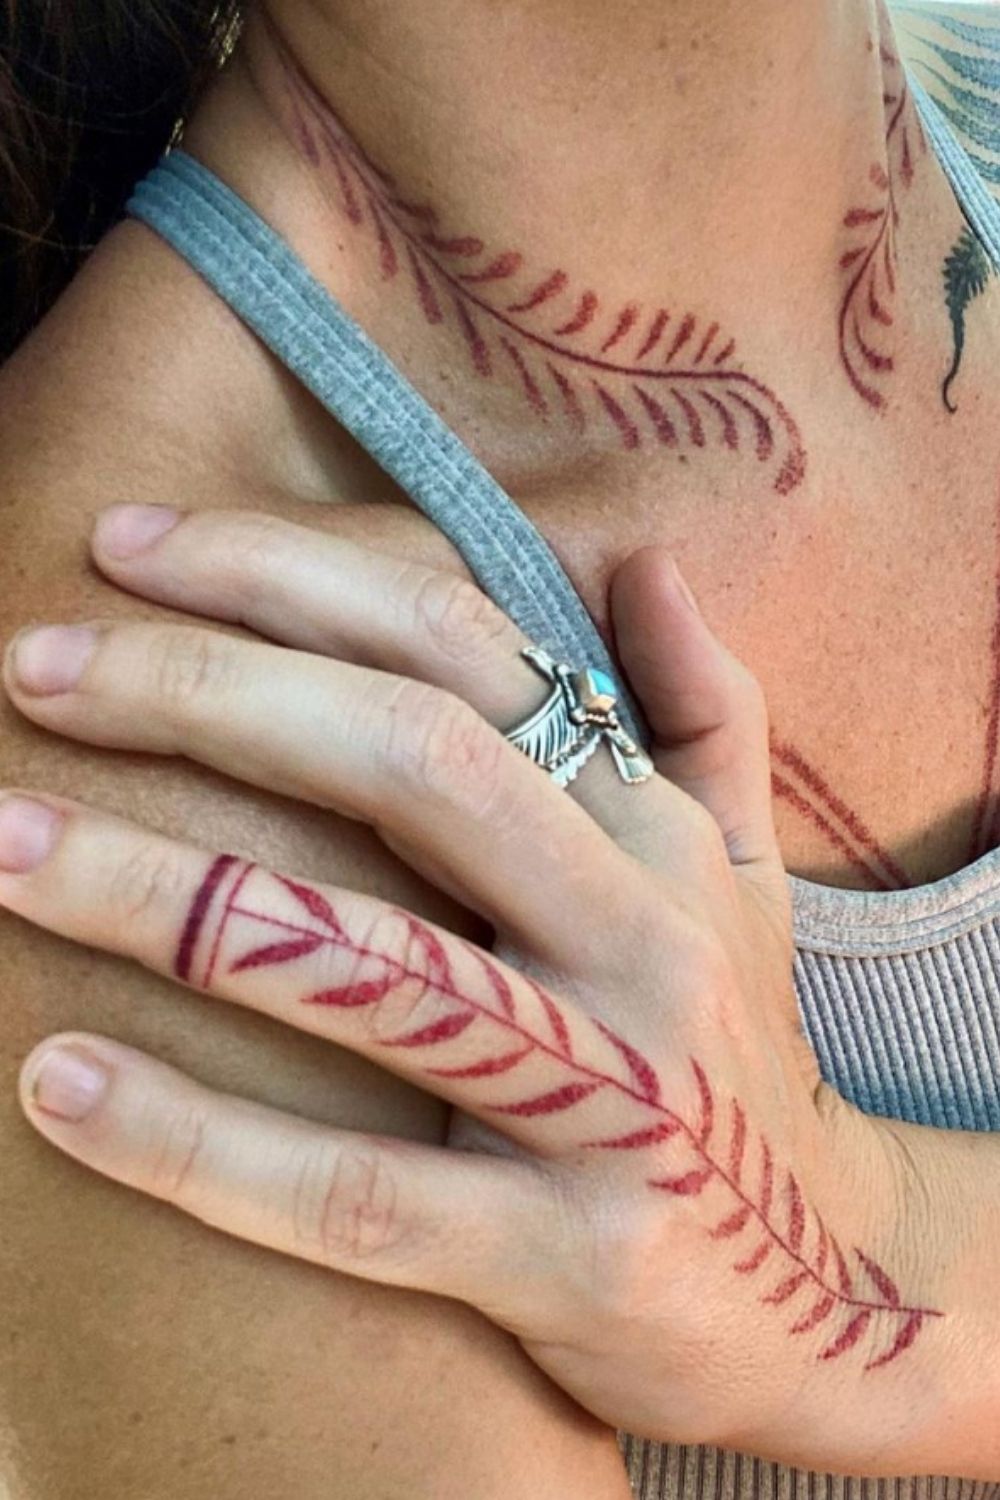 Best Small Finger Tattoo Design You'll Love To Try!